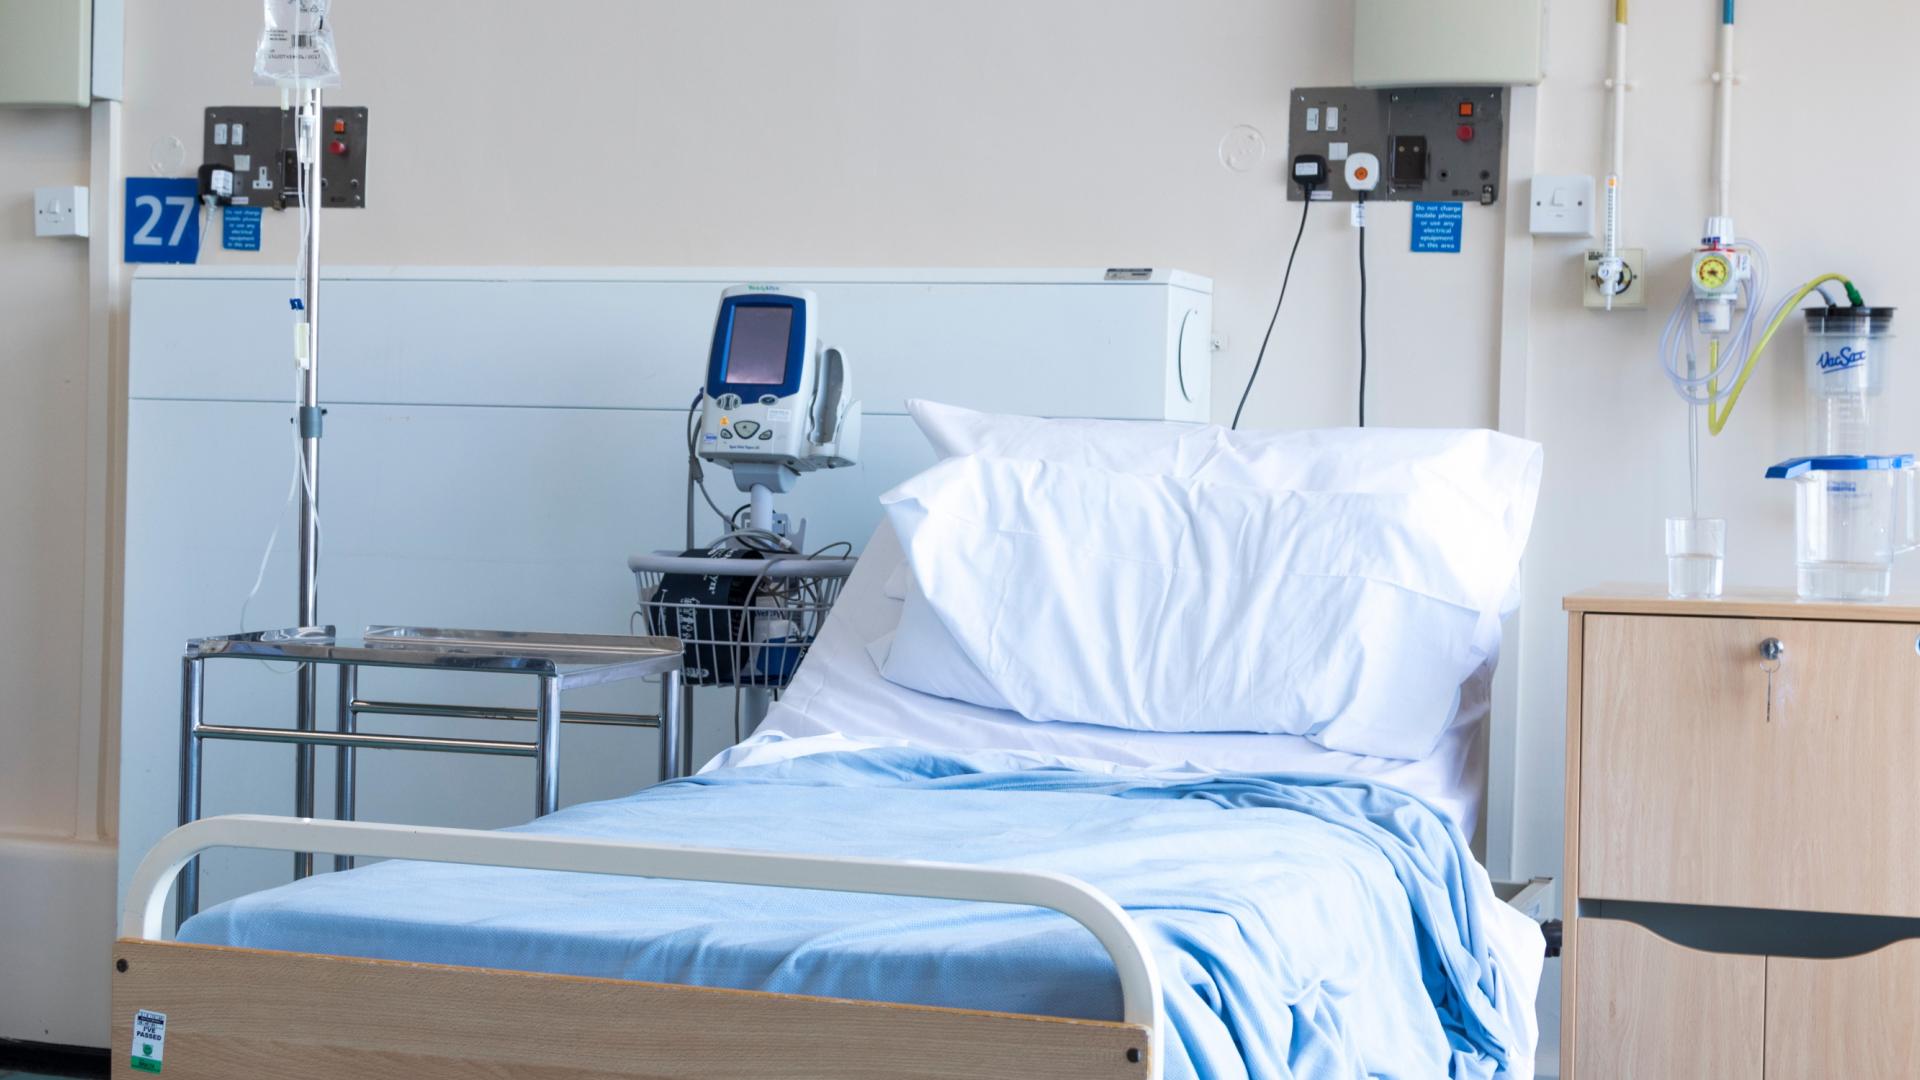 An image of an empty hospital bed